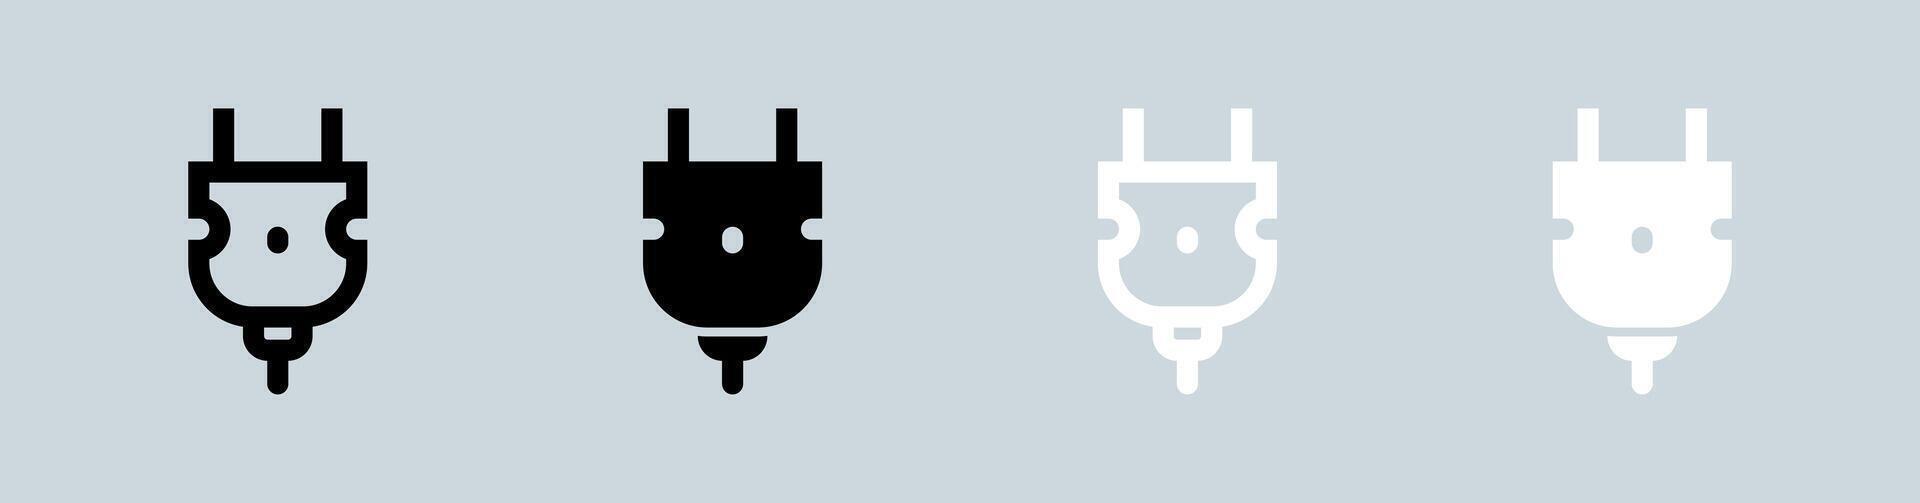 Socket icon set in black and white. Power plug signs illustration. vector